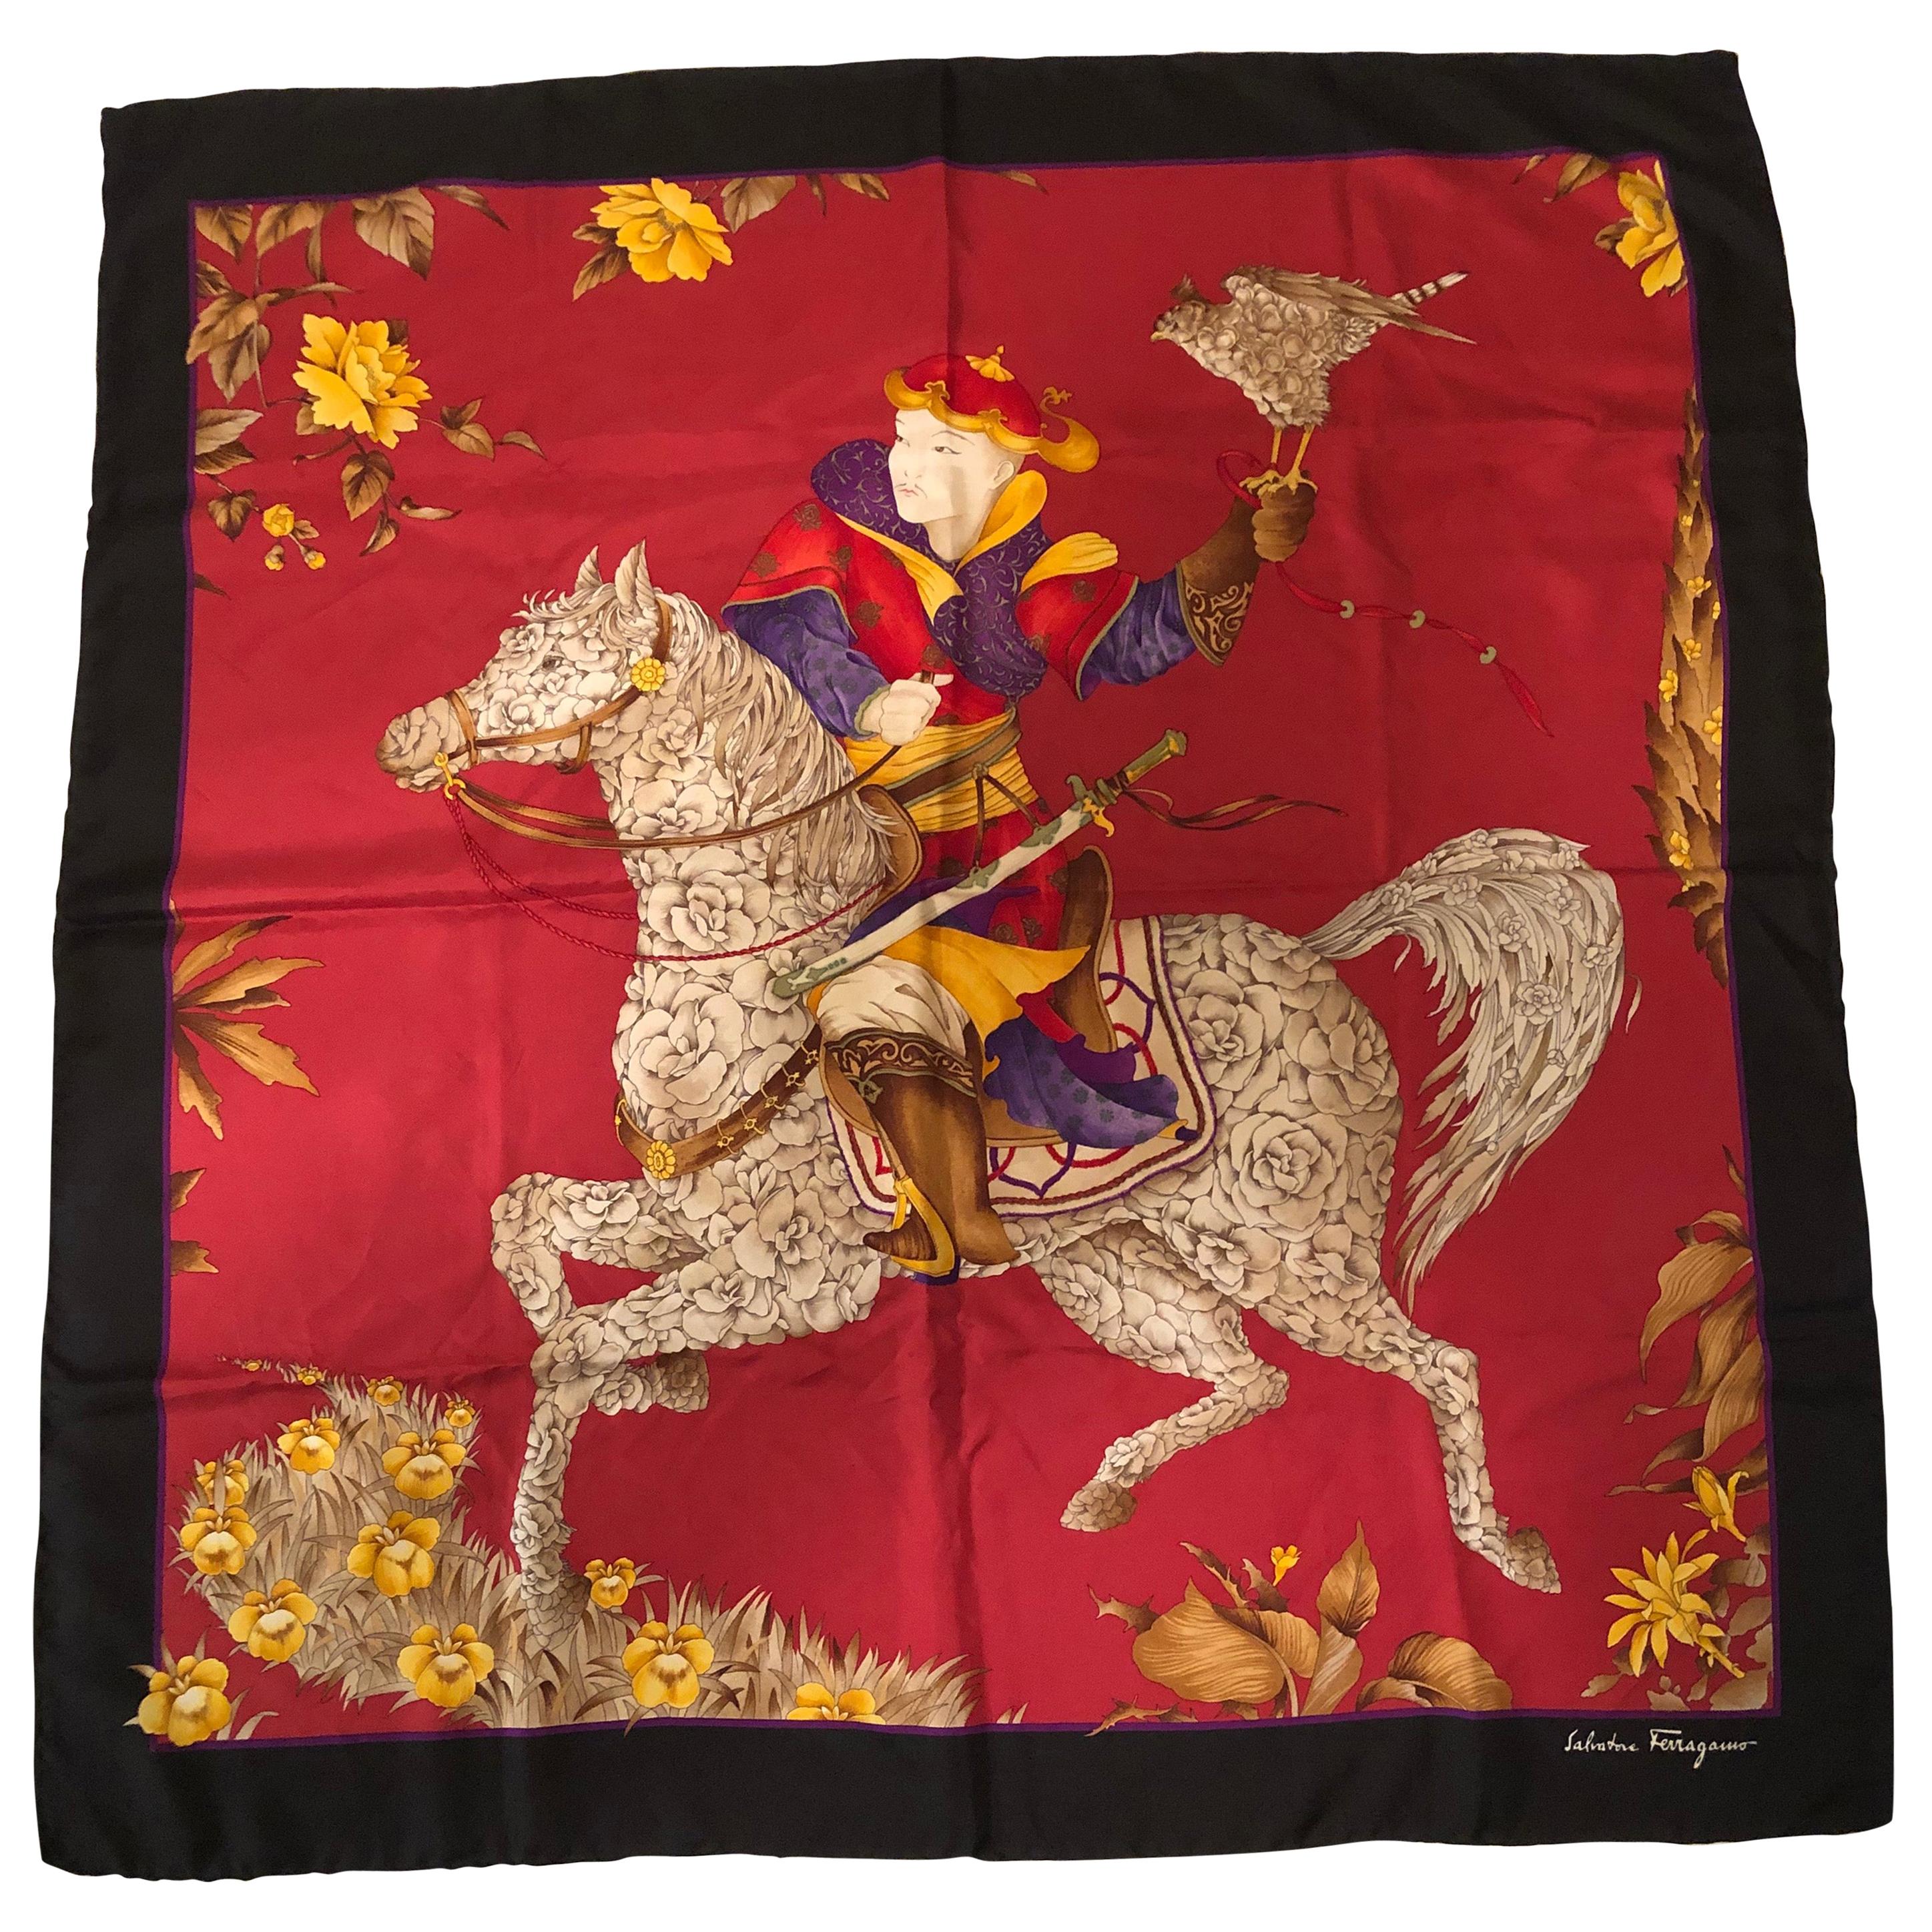 Salvatore Ferragamo Red Silk Scarf with a Stunning Design of a Man on a Horse